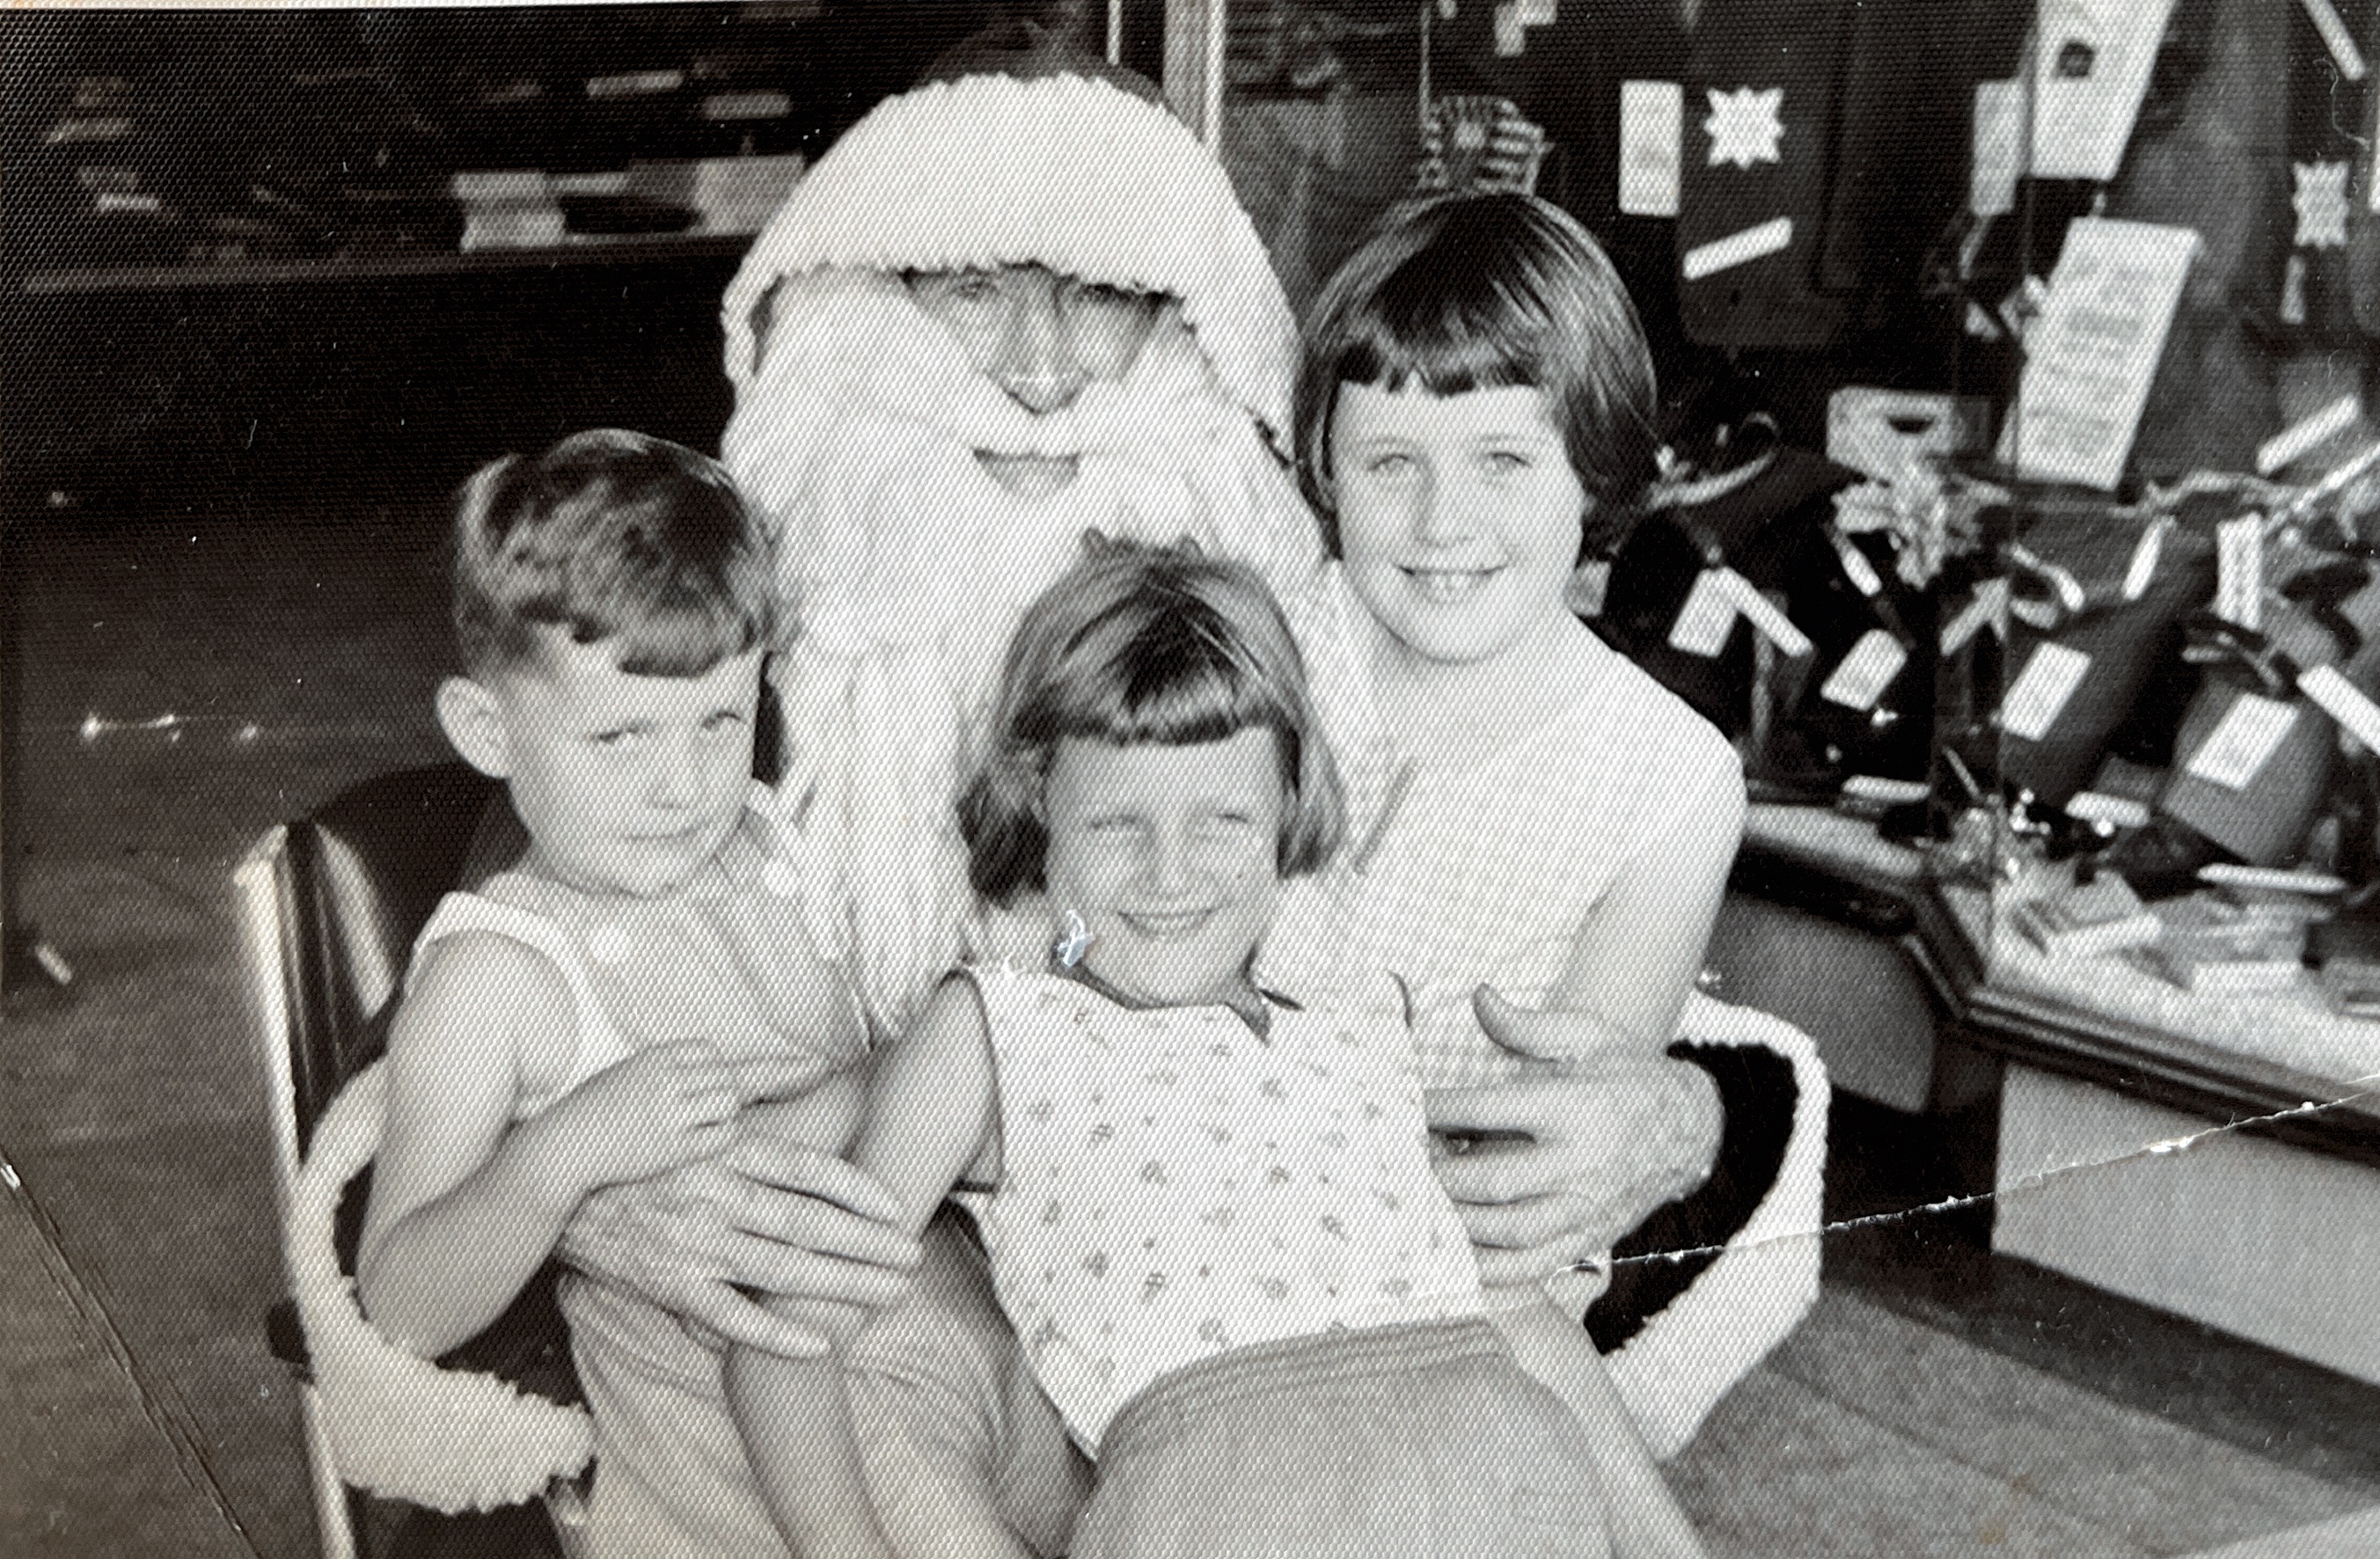 Sharon, Sandie and Ronnie with Santa about 1957